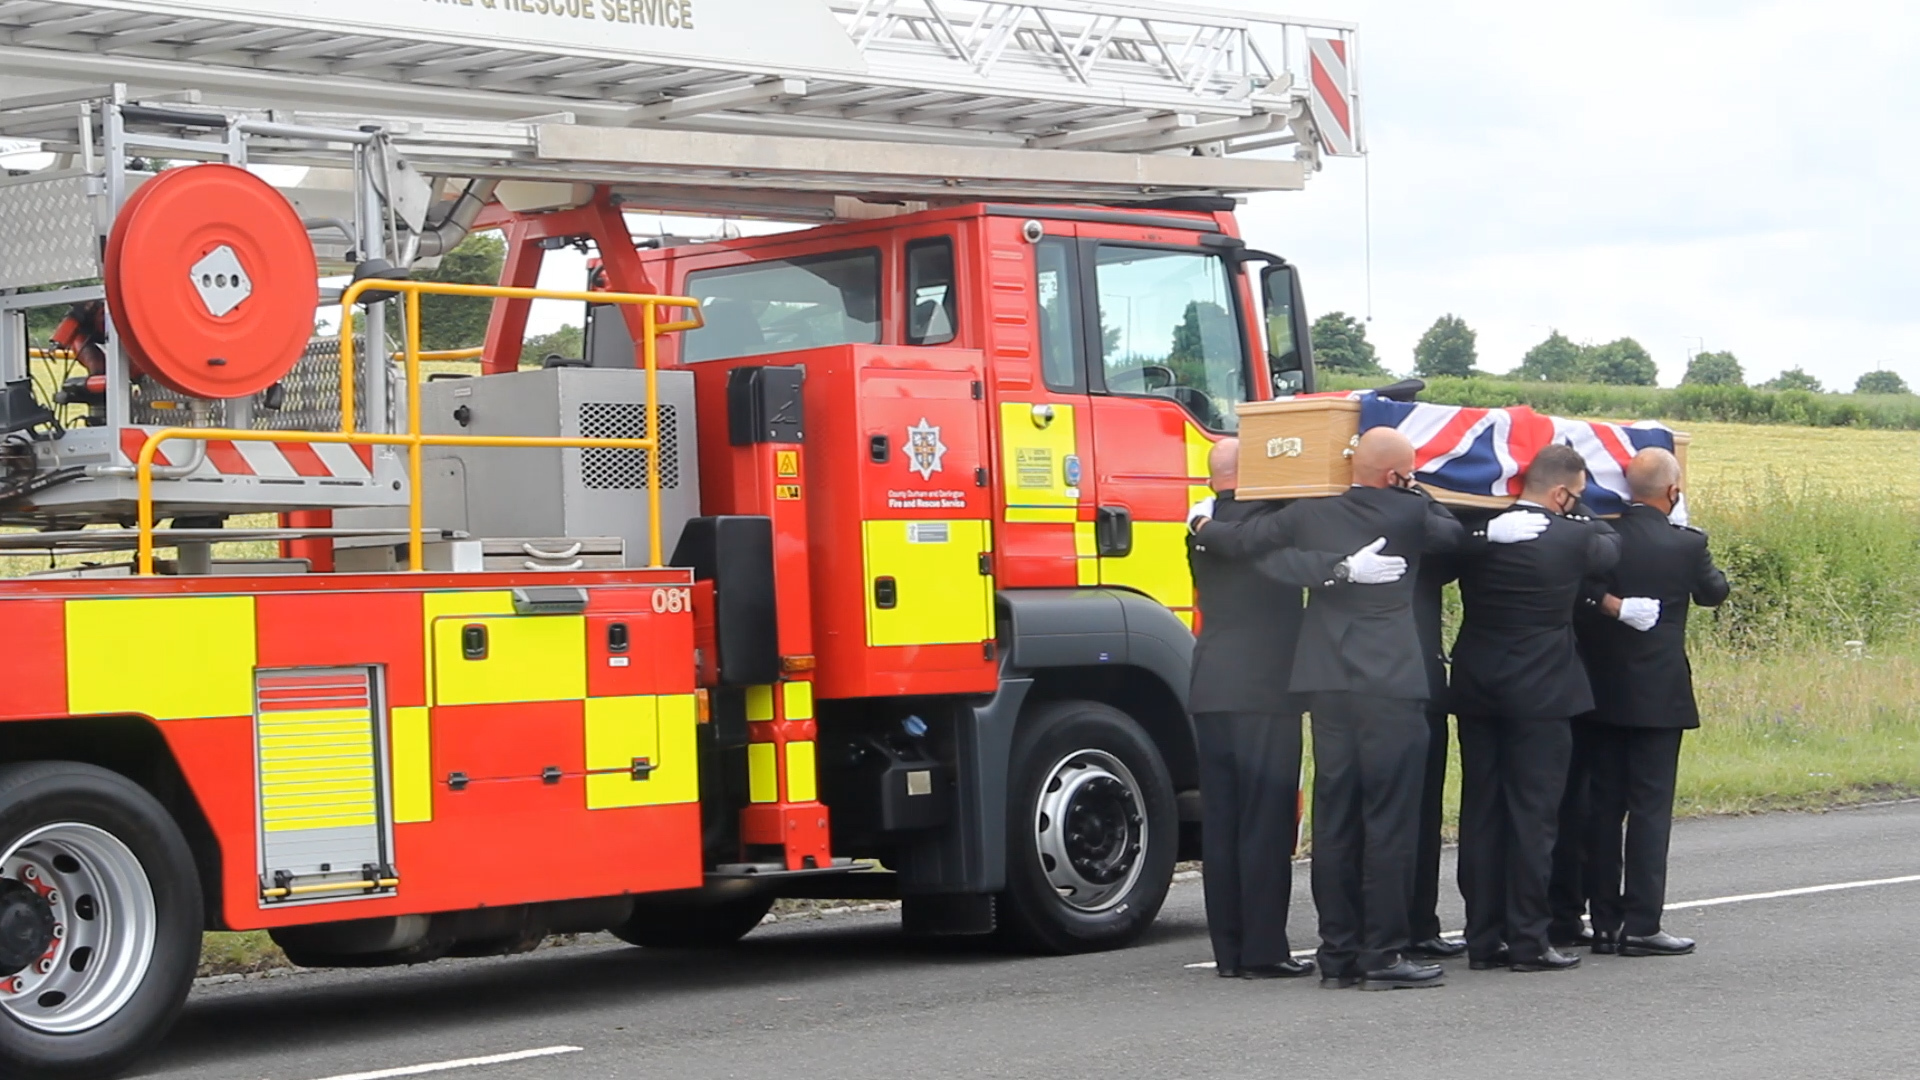 Retired ACFO from County Durham and Darlington Fire and Rescue Service Dominic Brown was given a full fire service funeral and was described as an outstanding officer whose commitment, bravery and humour touched everyone he met